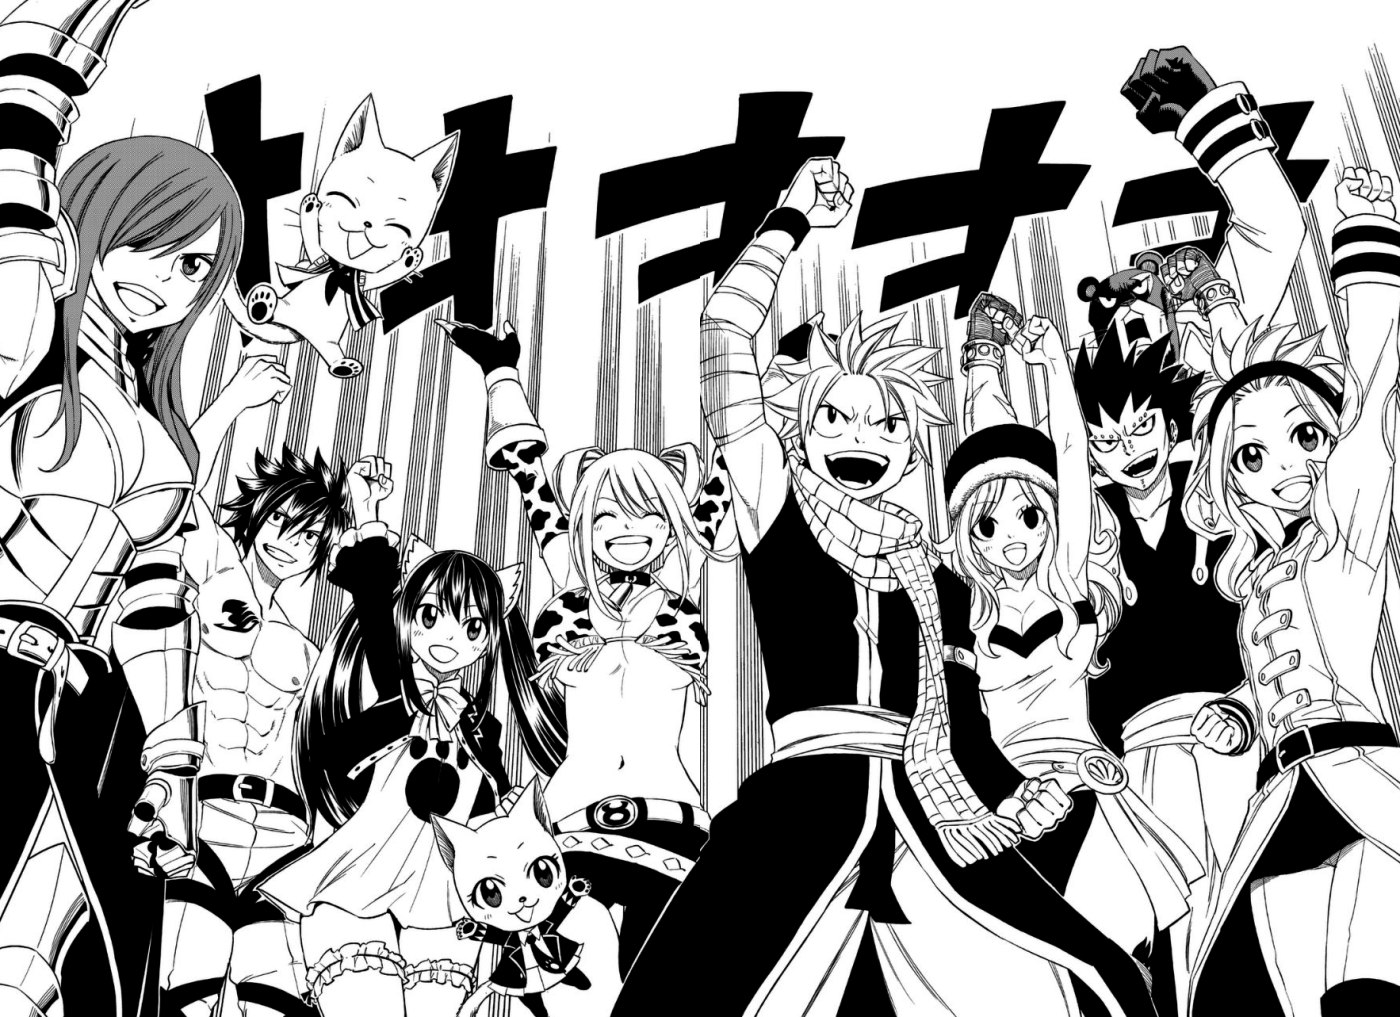 Read Manga Online for Free  Fairy tail anime, Fairy tail images, Fairy tail  manga